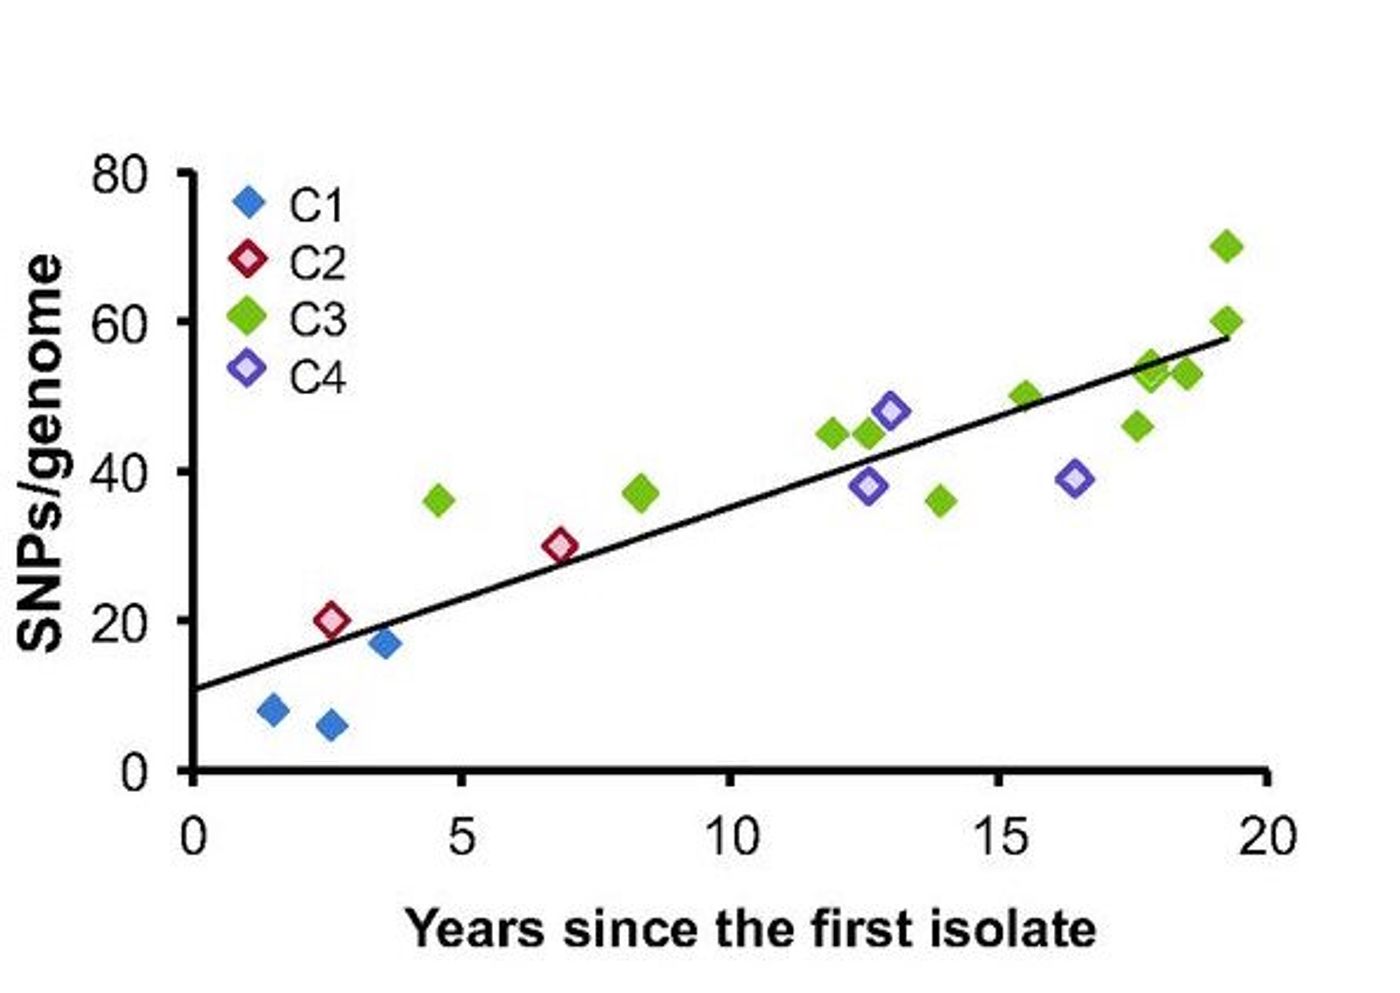 Number of SNPs distinguishing each isolate from the first (BM1) over time. Line of best fit with a slope of 2.4 mutations per year is shown.